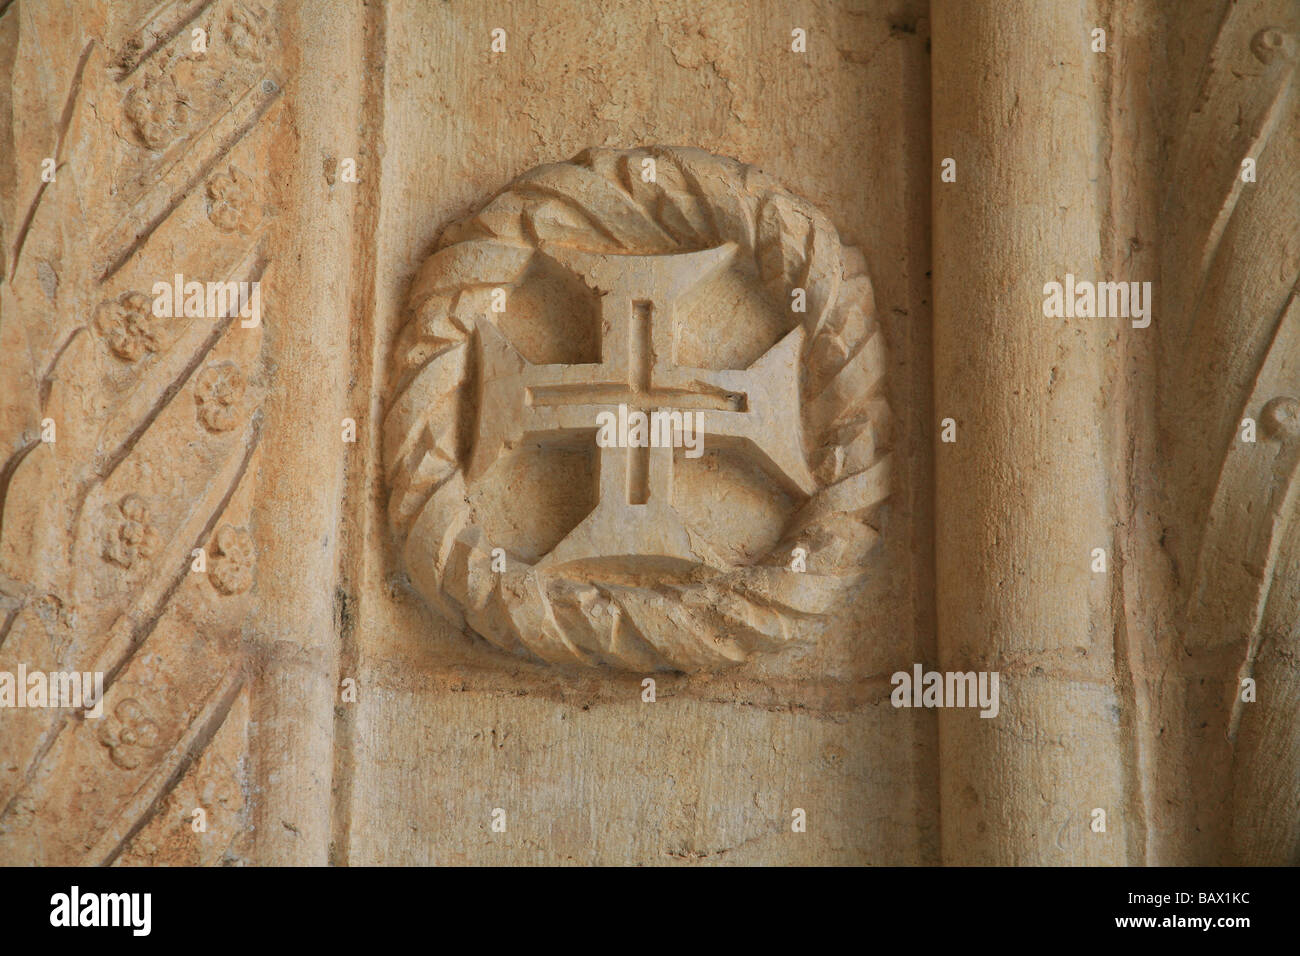 Symbol of the Order of Christ on a cloister column of the Jeronimos Monastery in Lisbon, Portugal Stock Photo